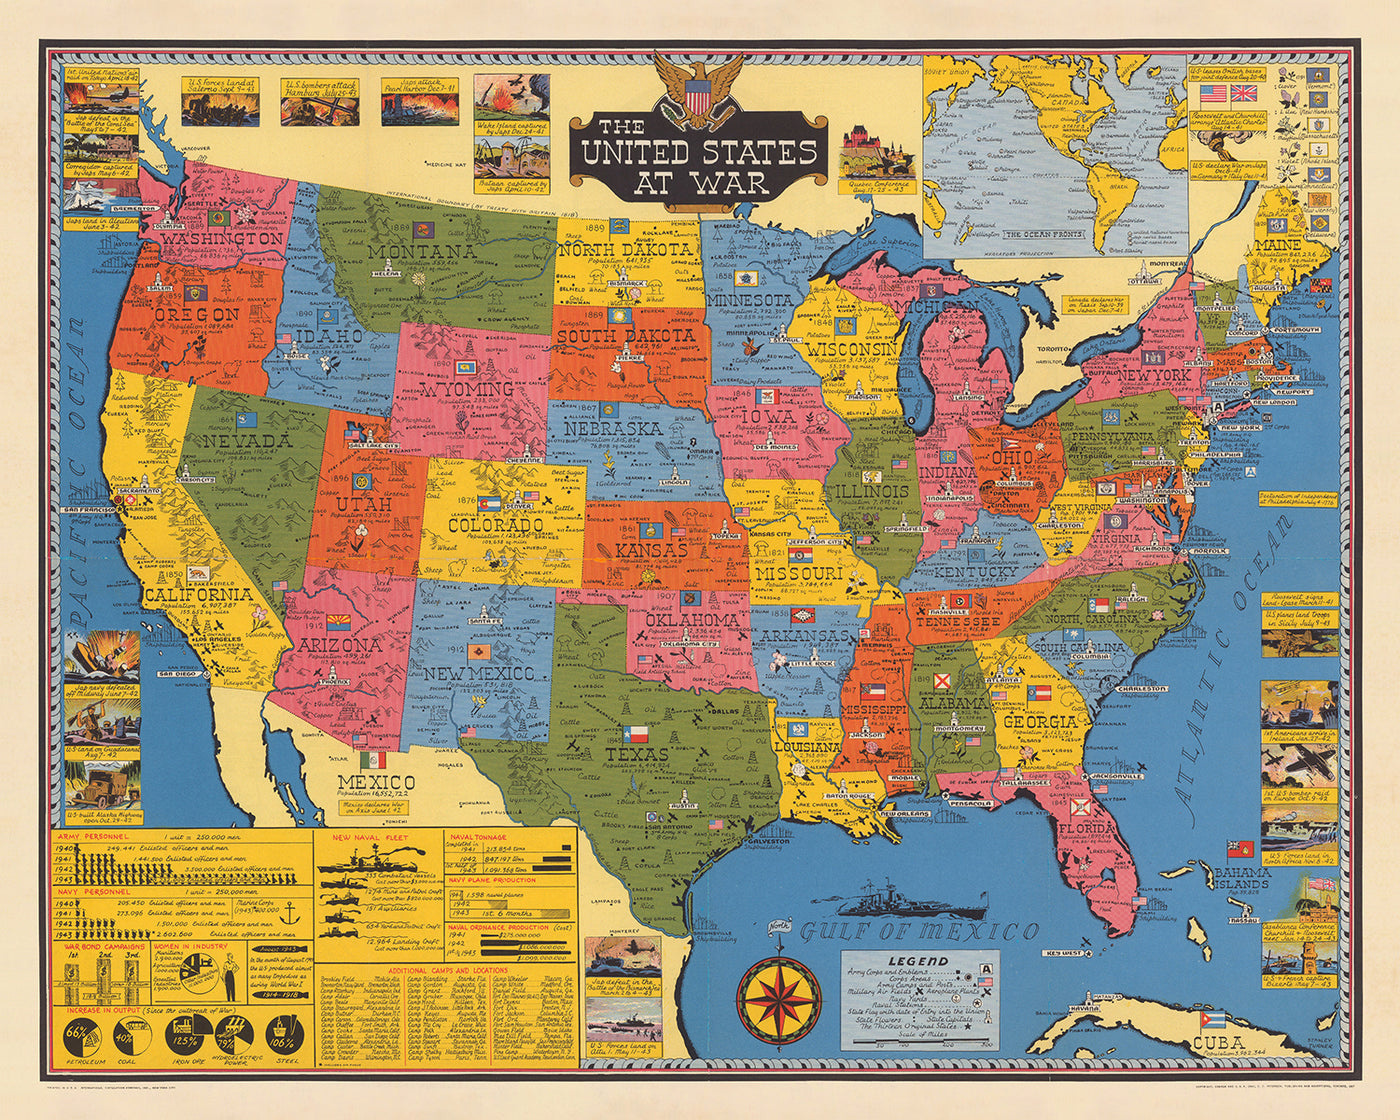 Old Map of USA at War by Stanley Turner, 1943: Domestic World War 2 Army & Navy Chart